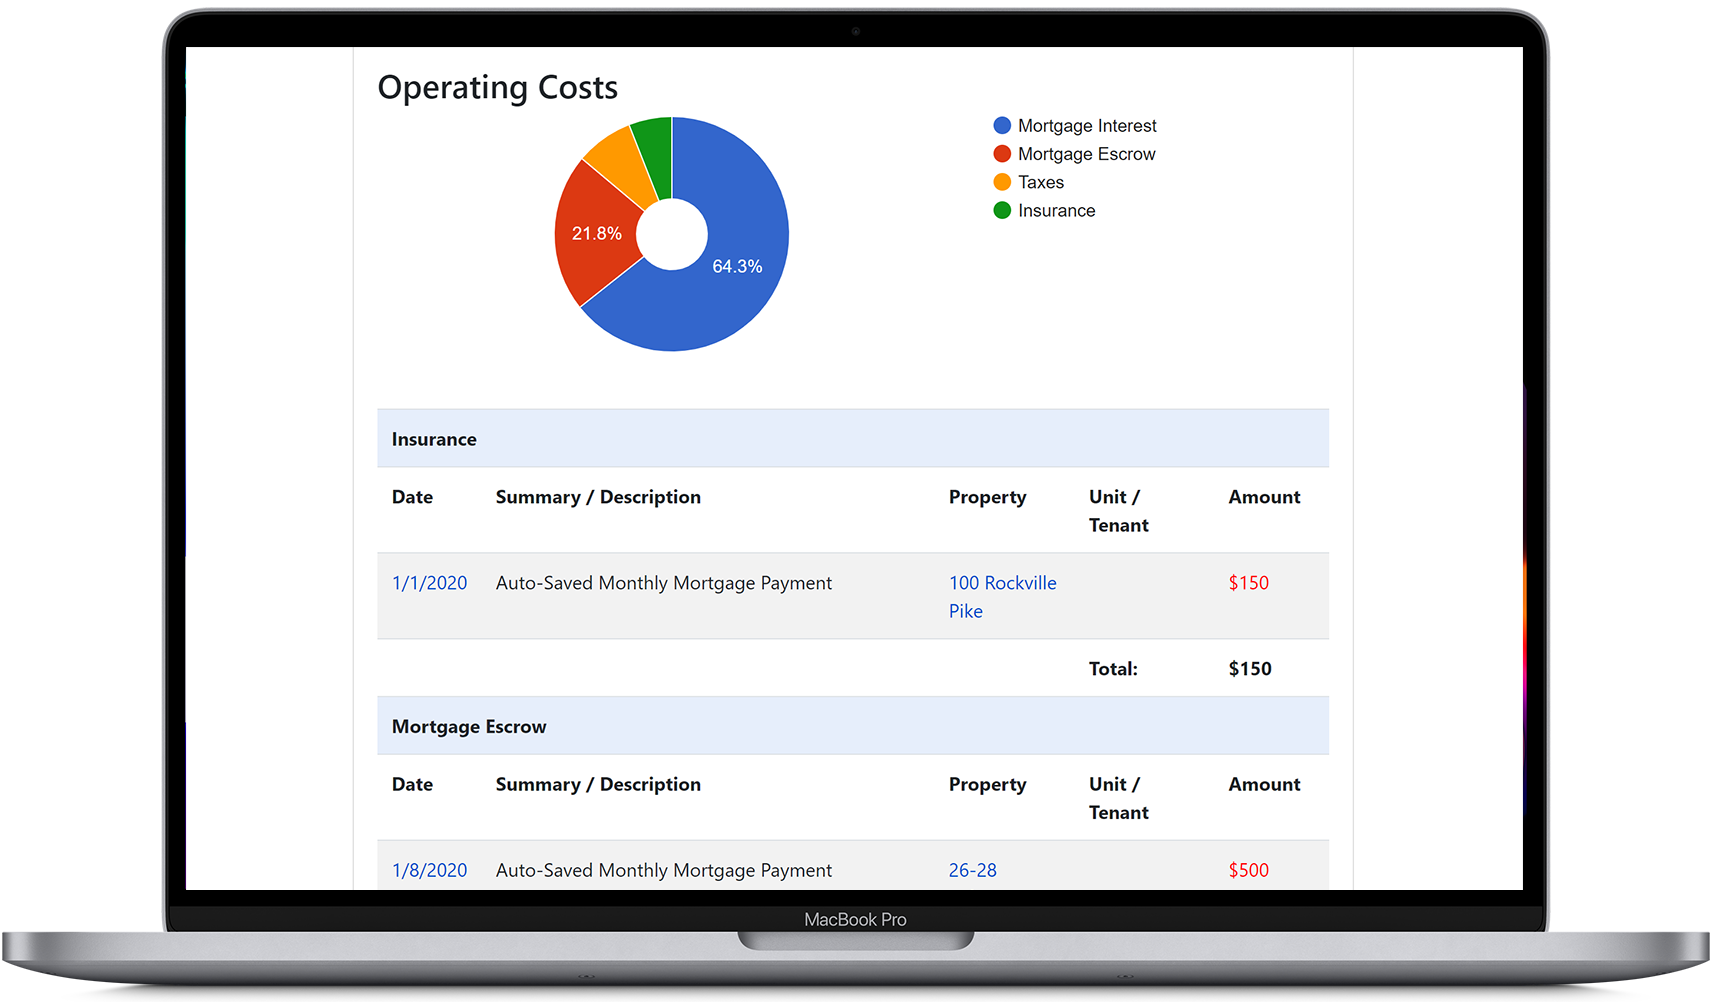 View the operating costs report in our property manager software, showing rental expenses